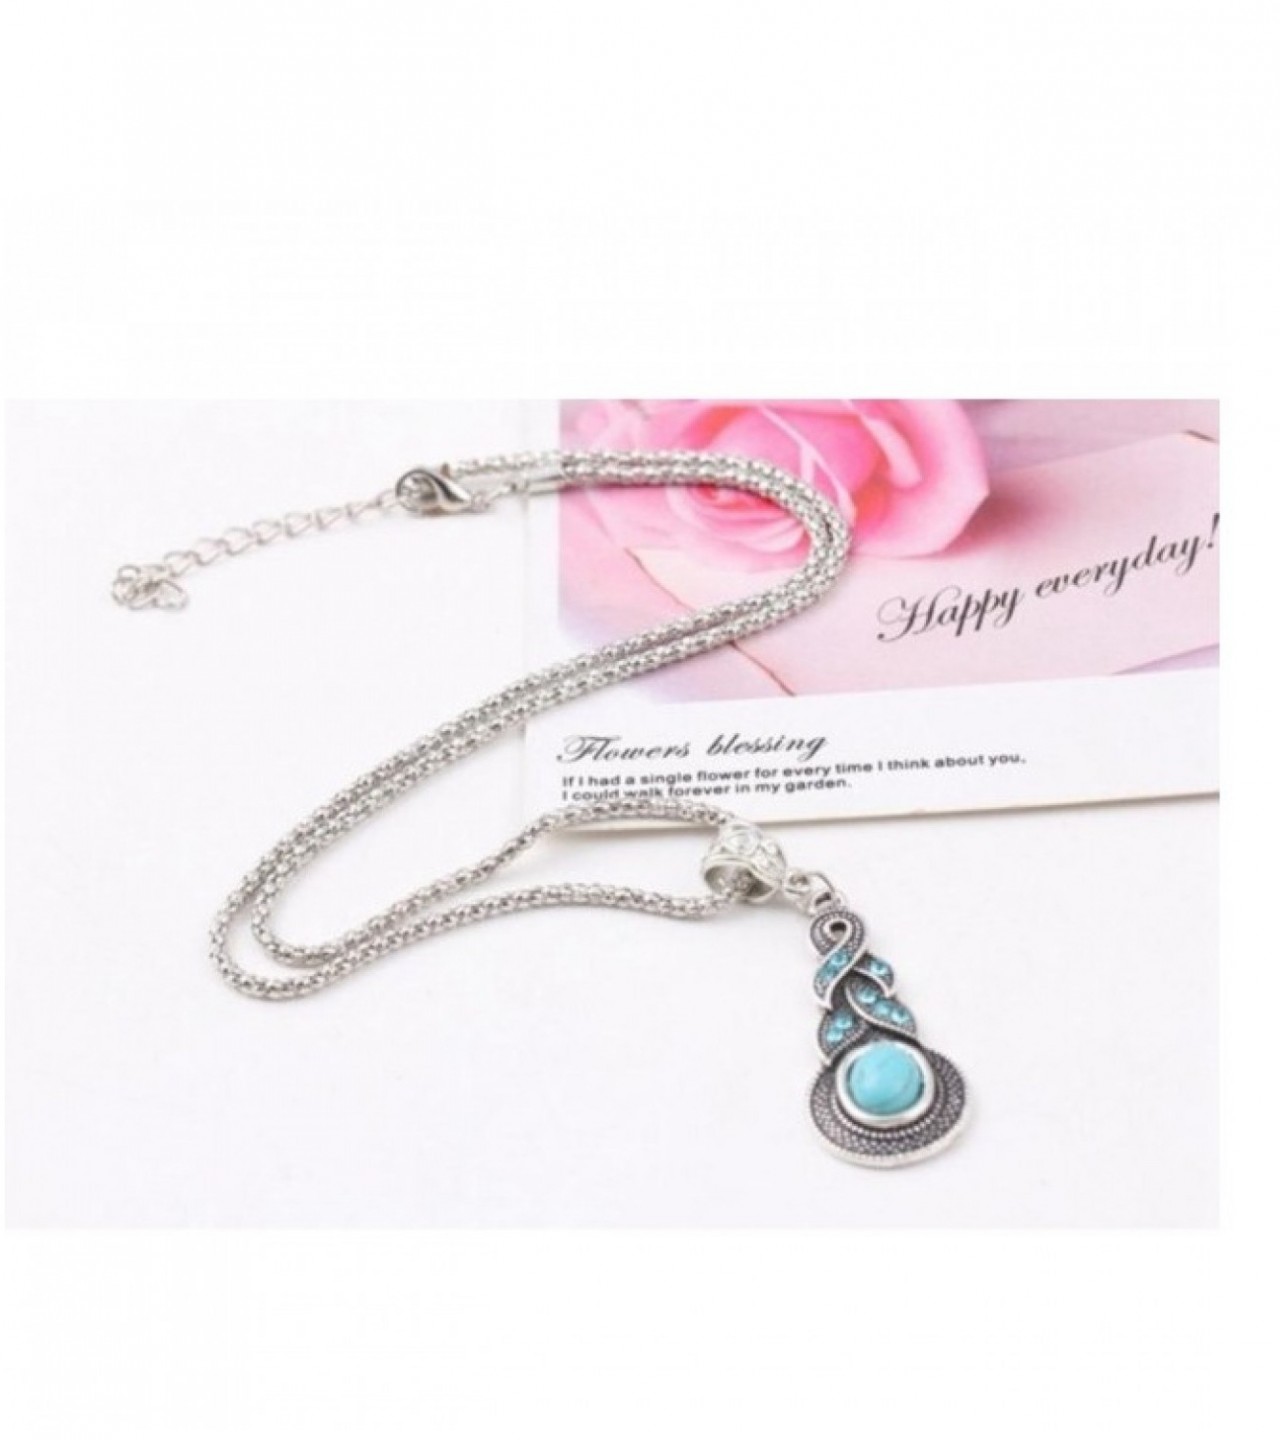 Round Jewelry Charming Blue Stone Infinity Pendant Necklace